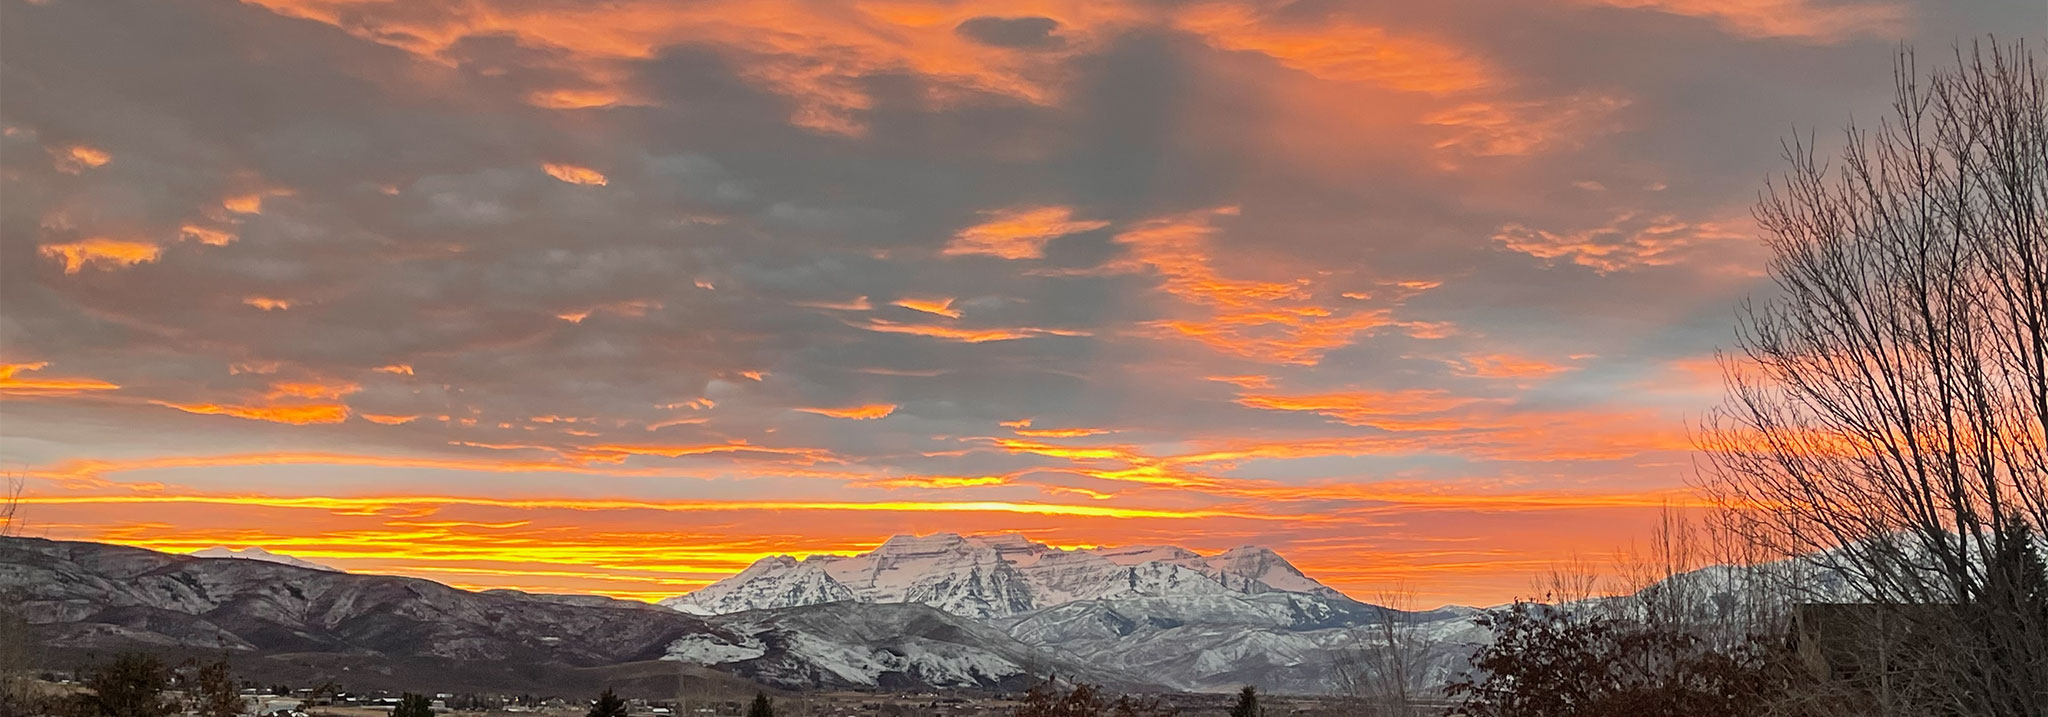 Heber Valley Sunset View of Mount Timpanogos